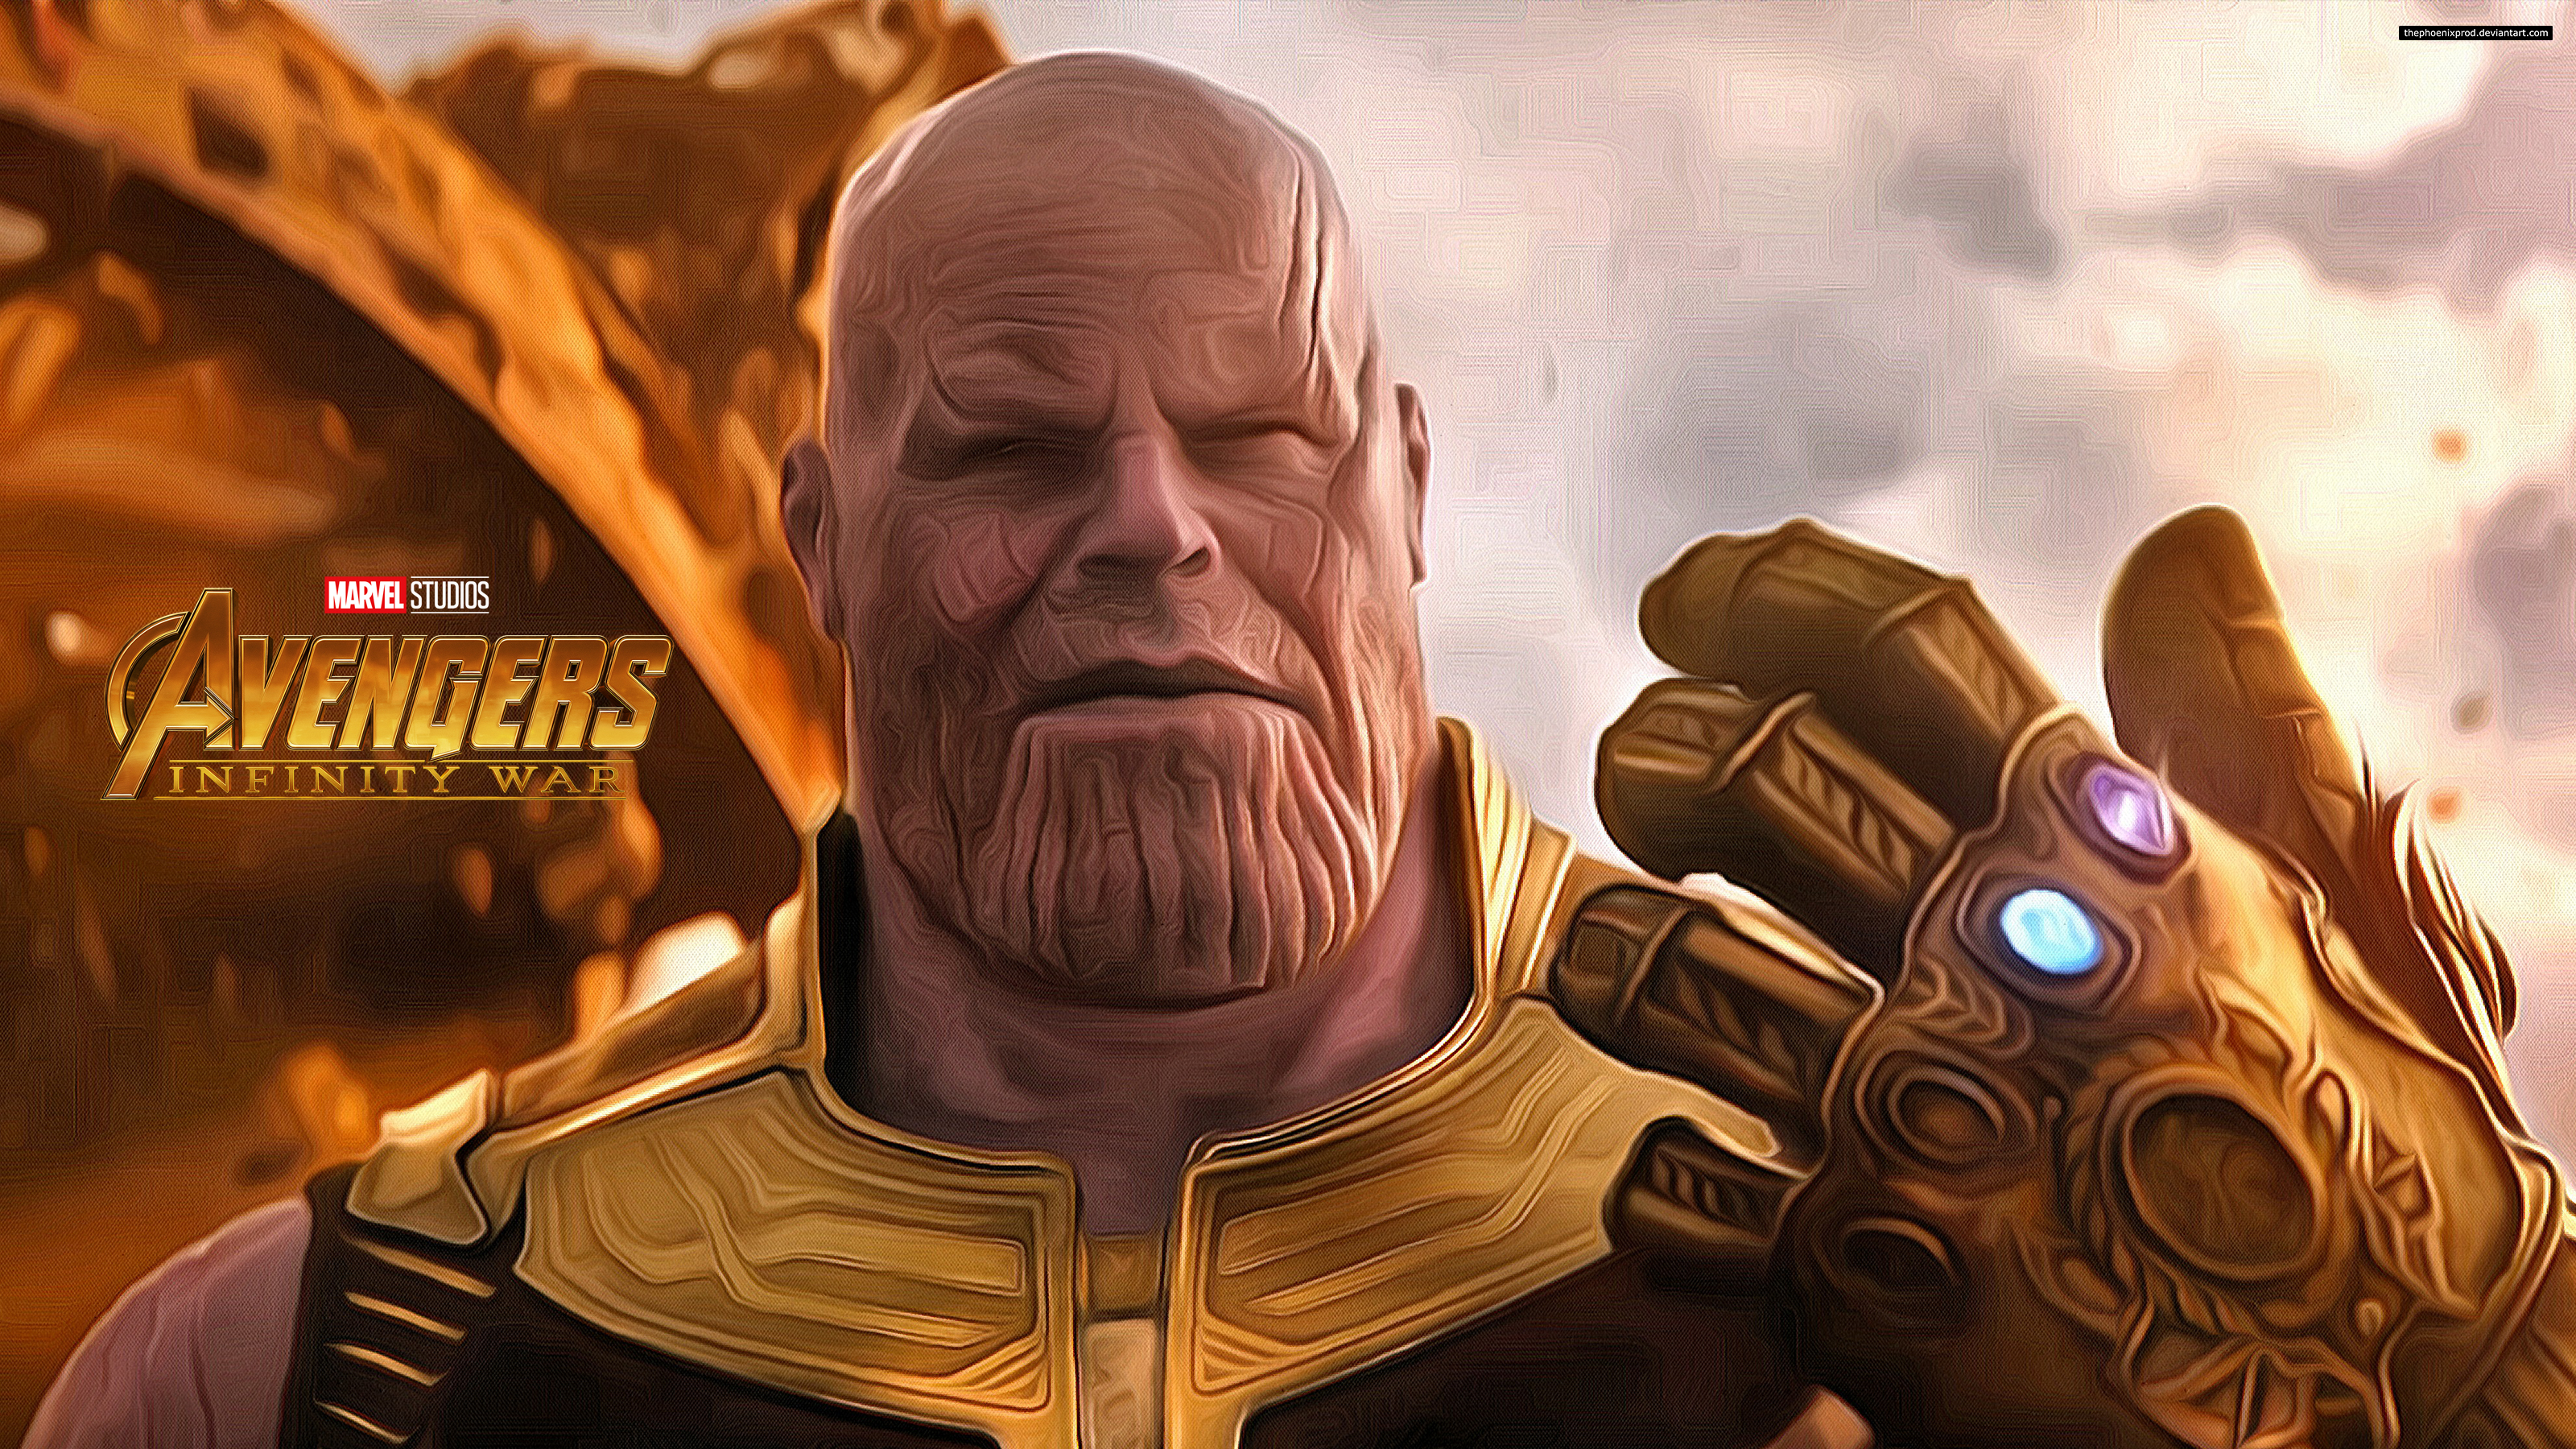 170+ Thanos HD Wallpapers and Backgrounds